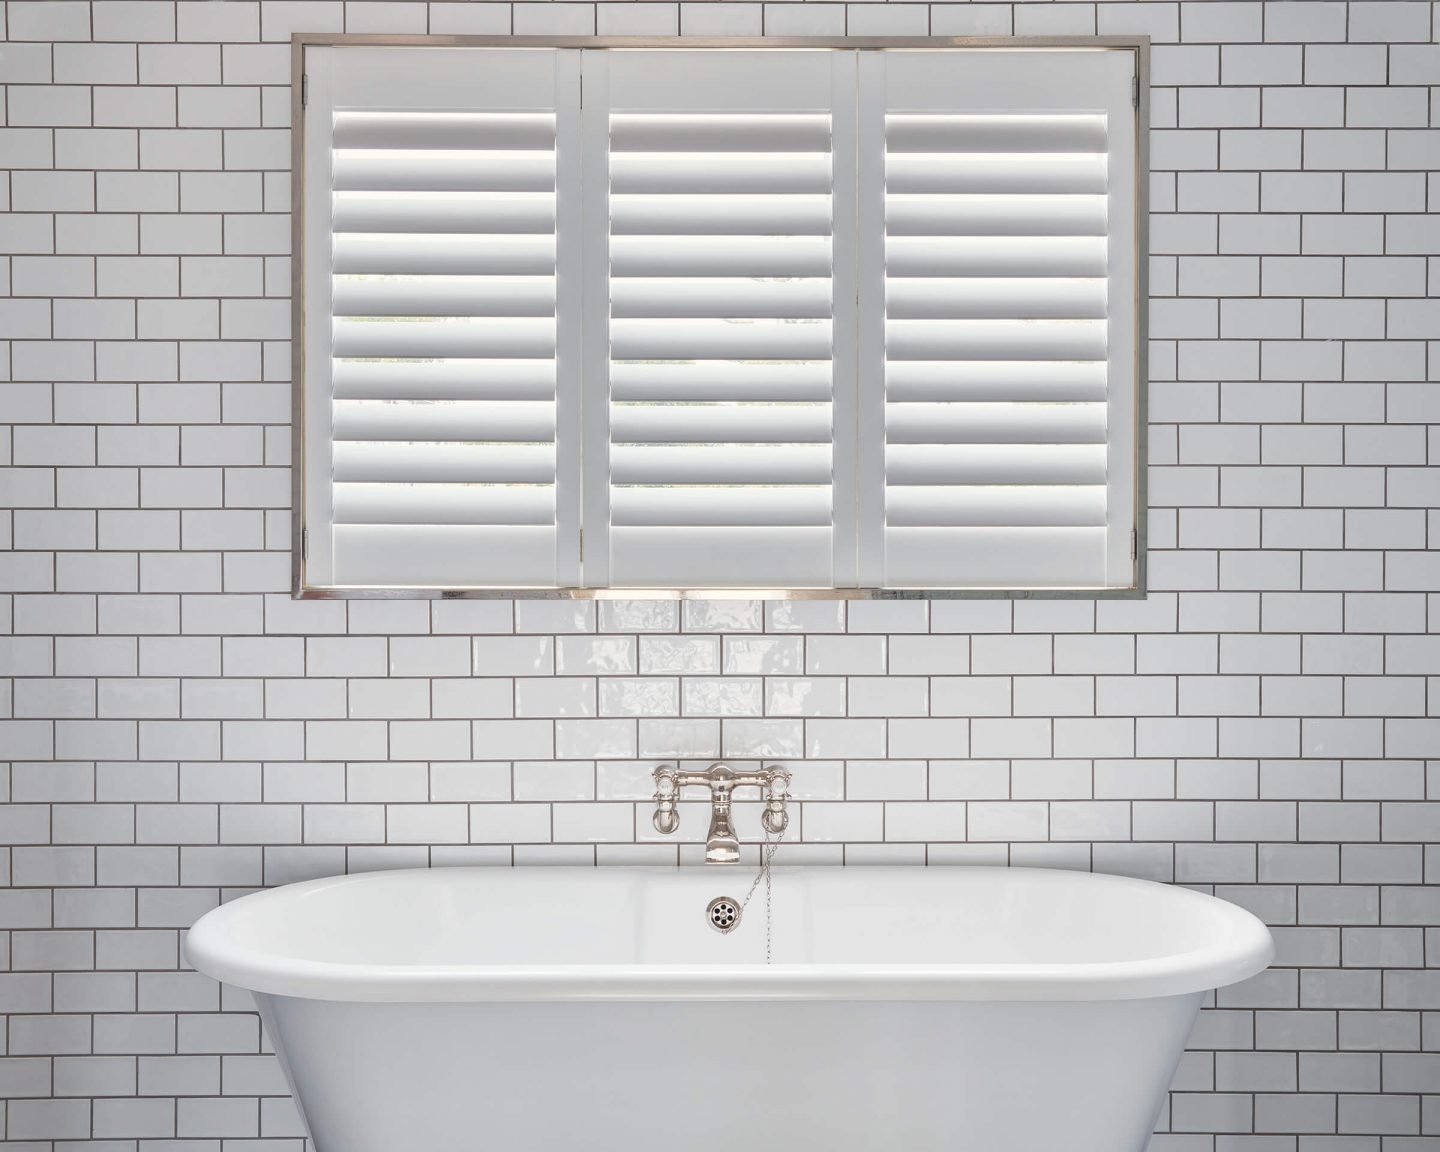 Shutters — Shade Elements — Creating spaces for living